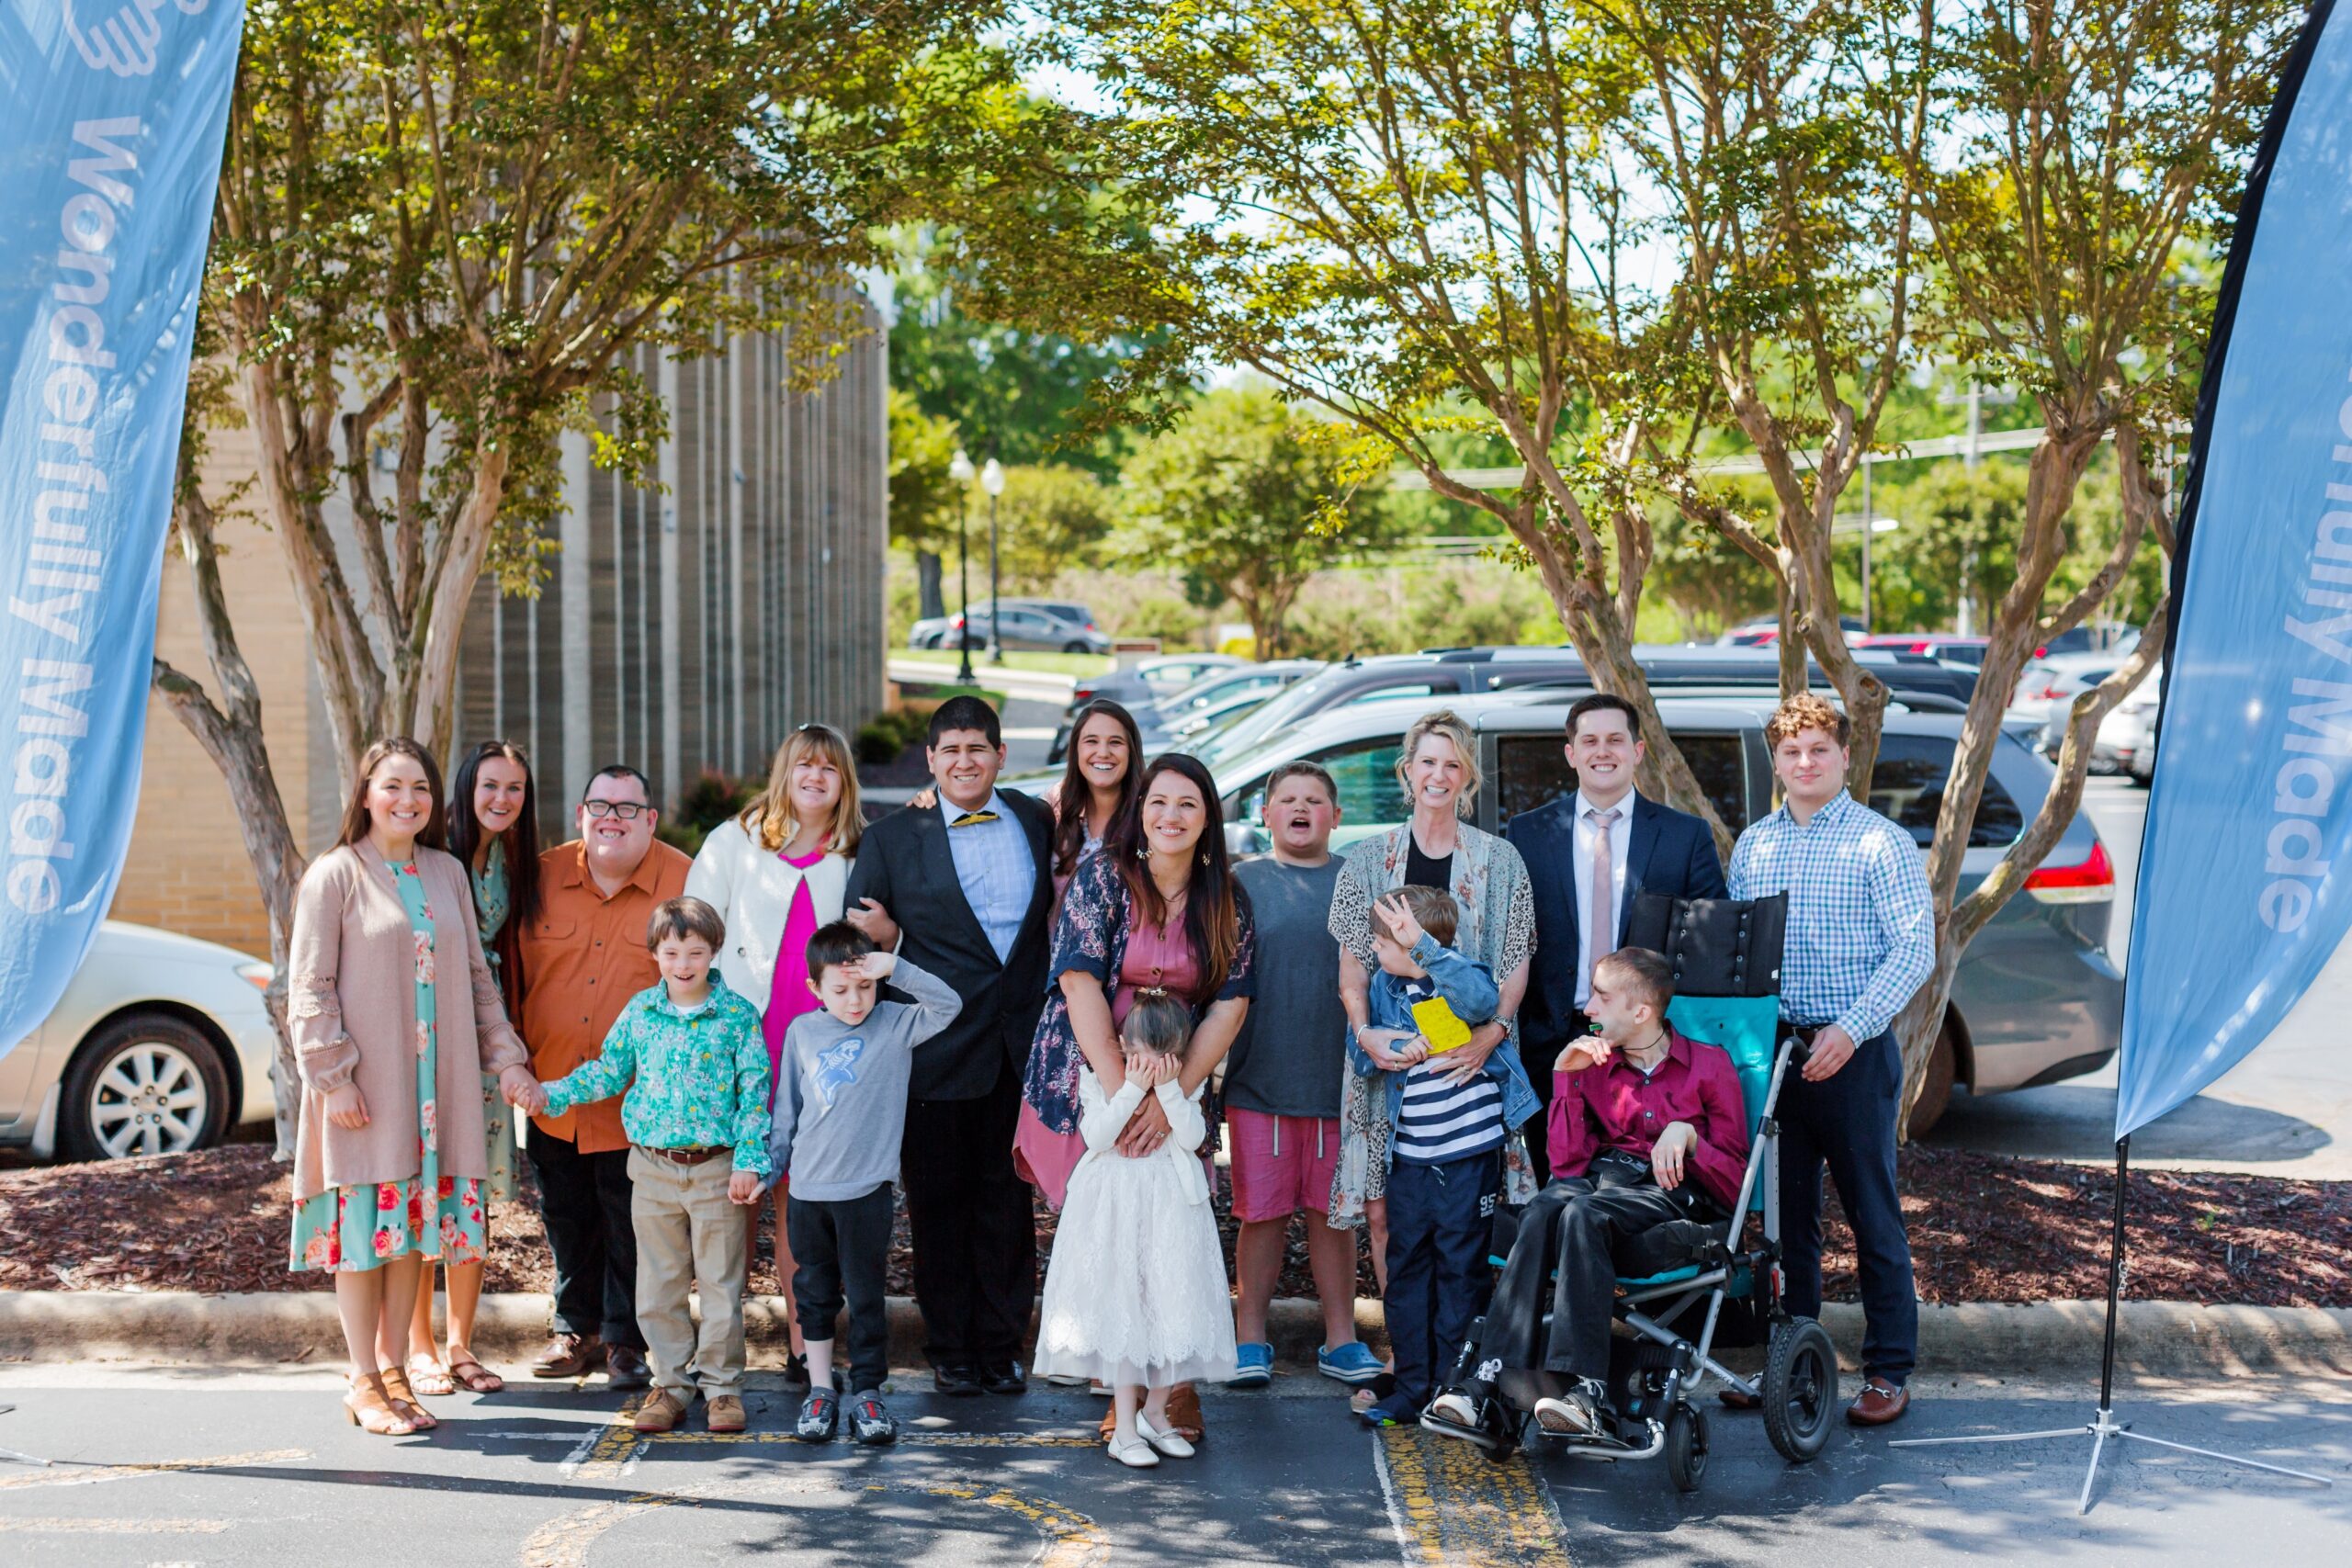 A group photo of Lauren and families from the disability ministry.